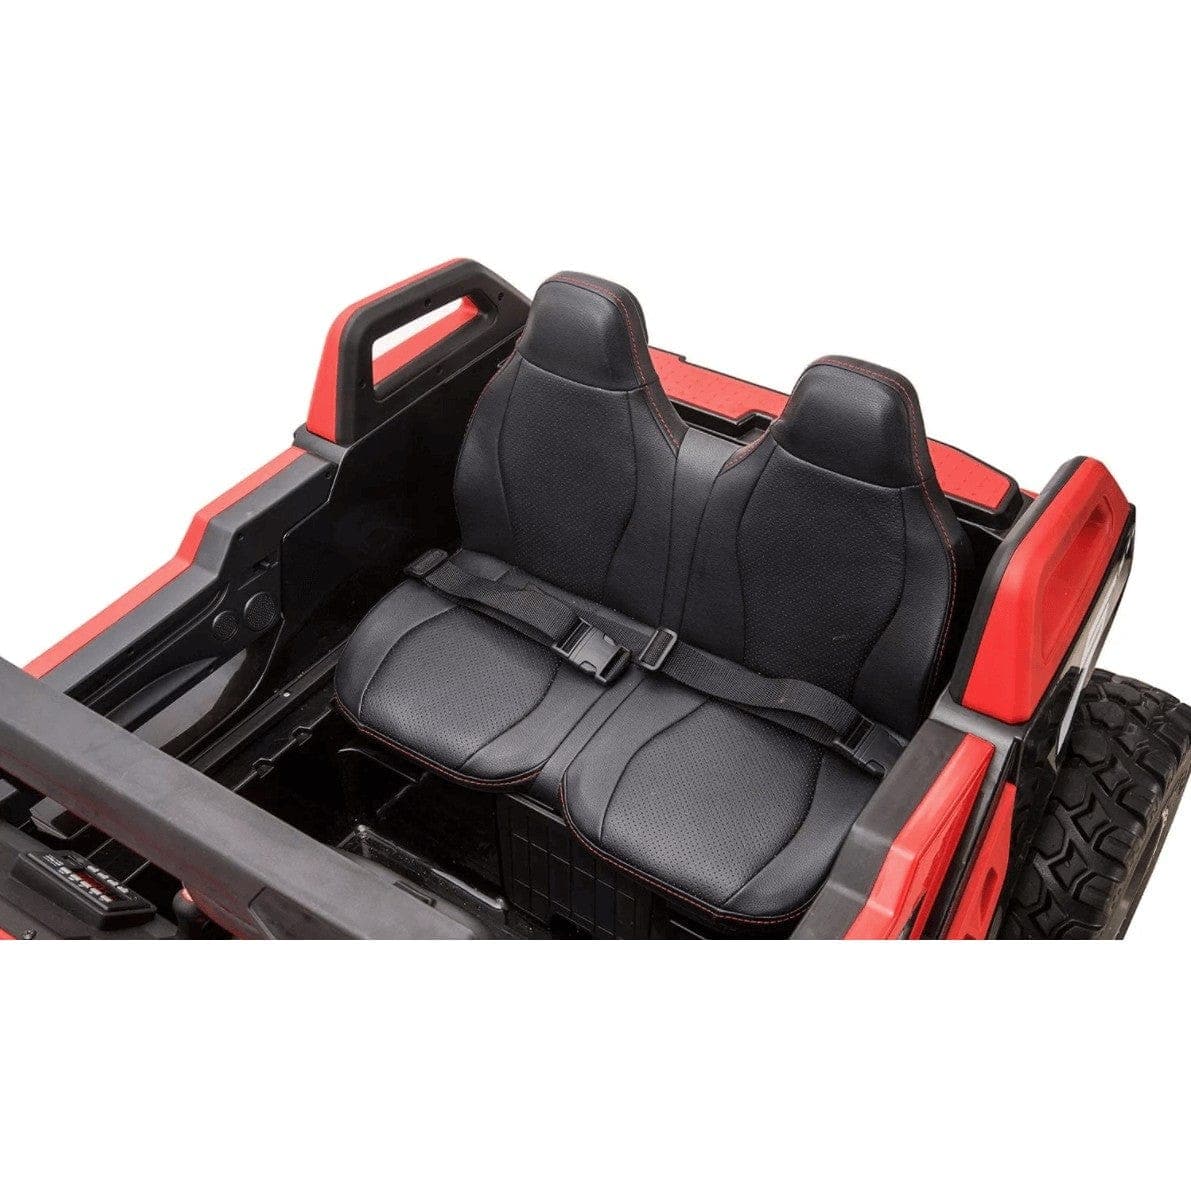 2 Seater All Wheel Drive Buggy 24V UTV Electric Ride On Kid Car R&G TOYS